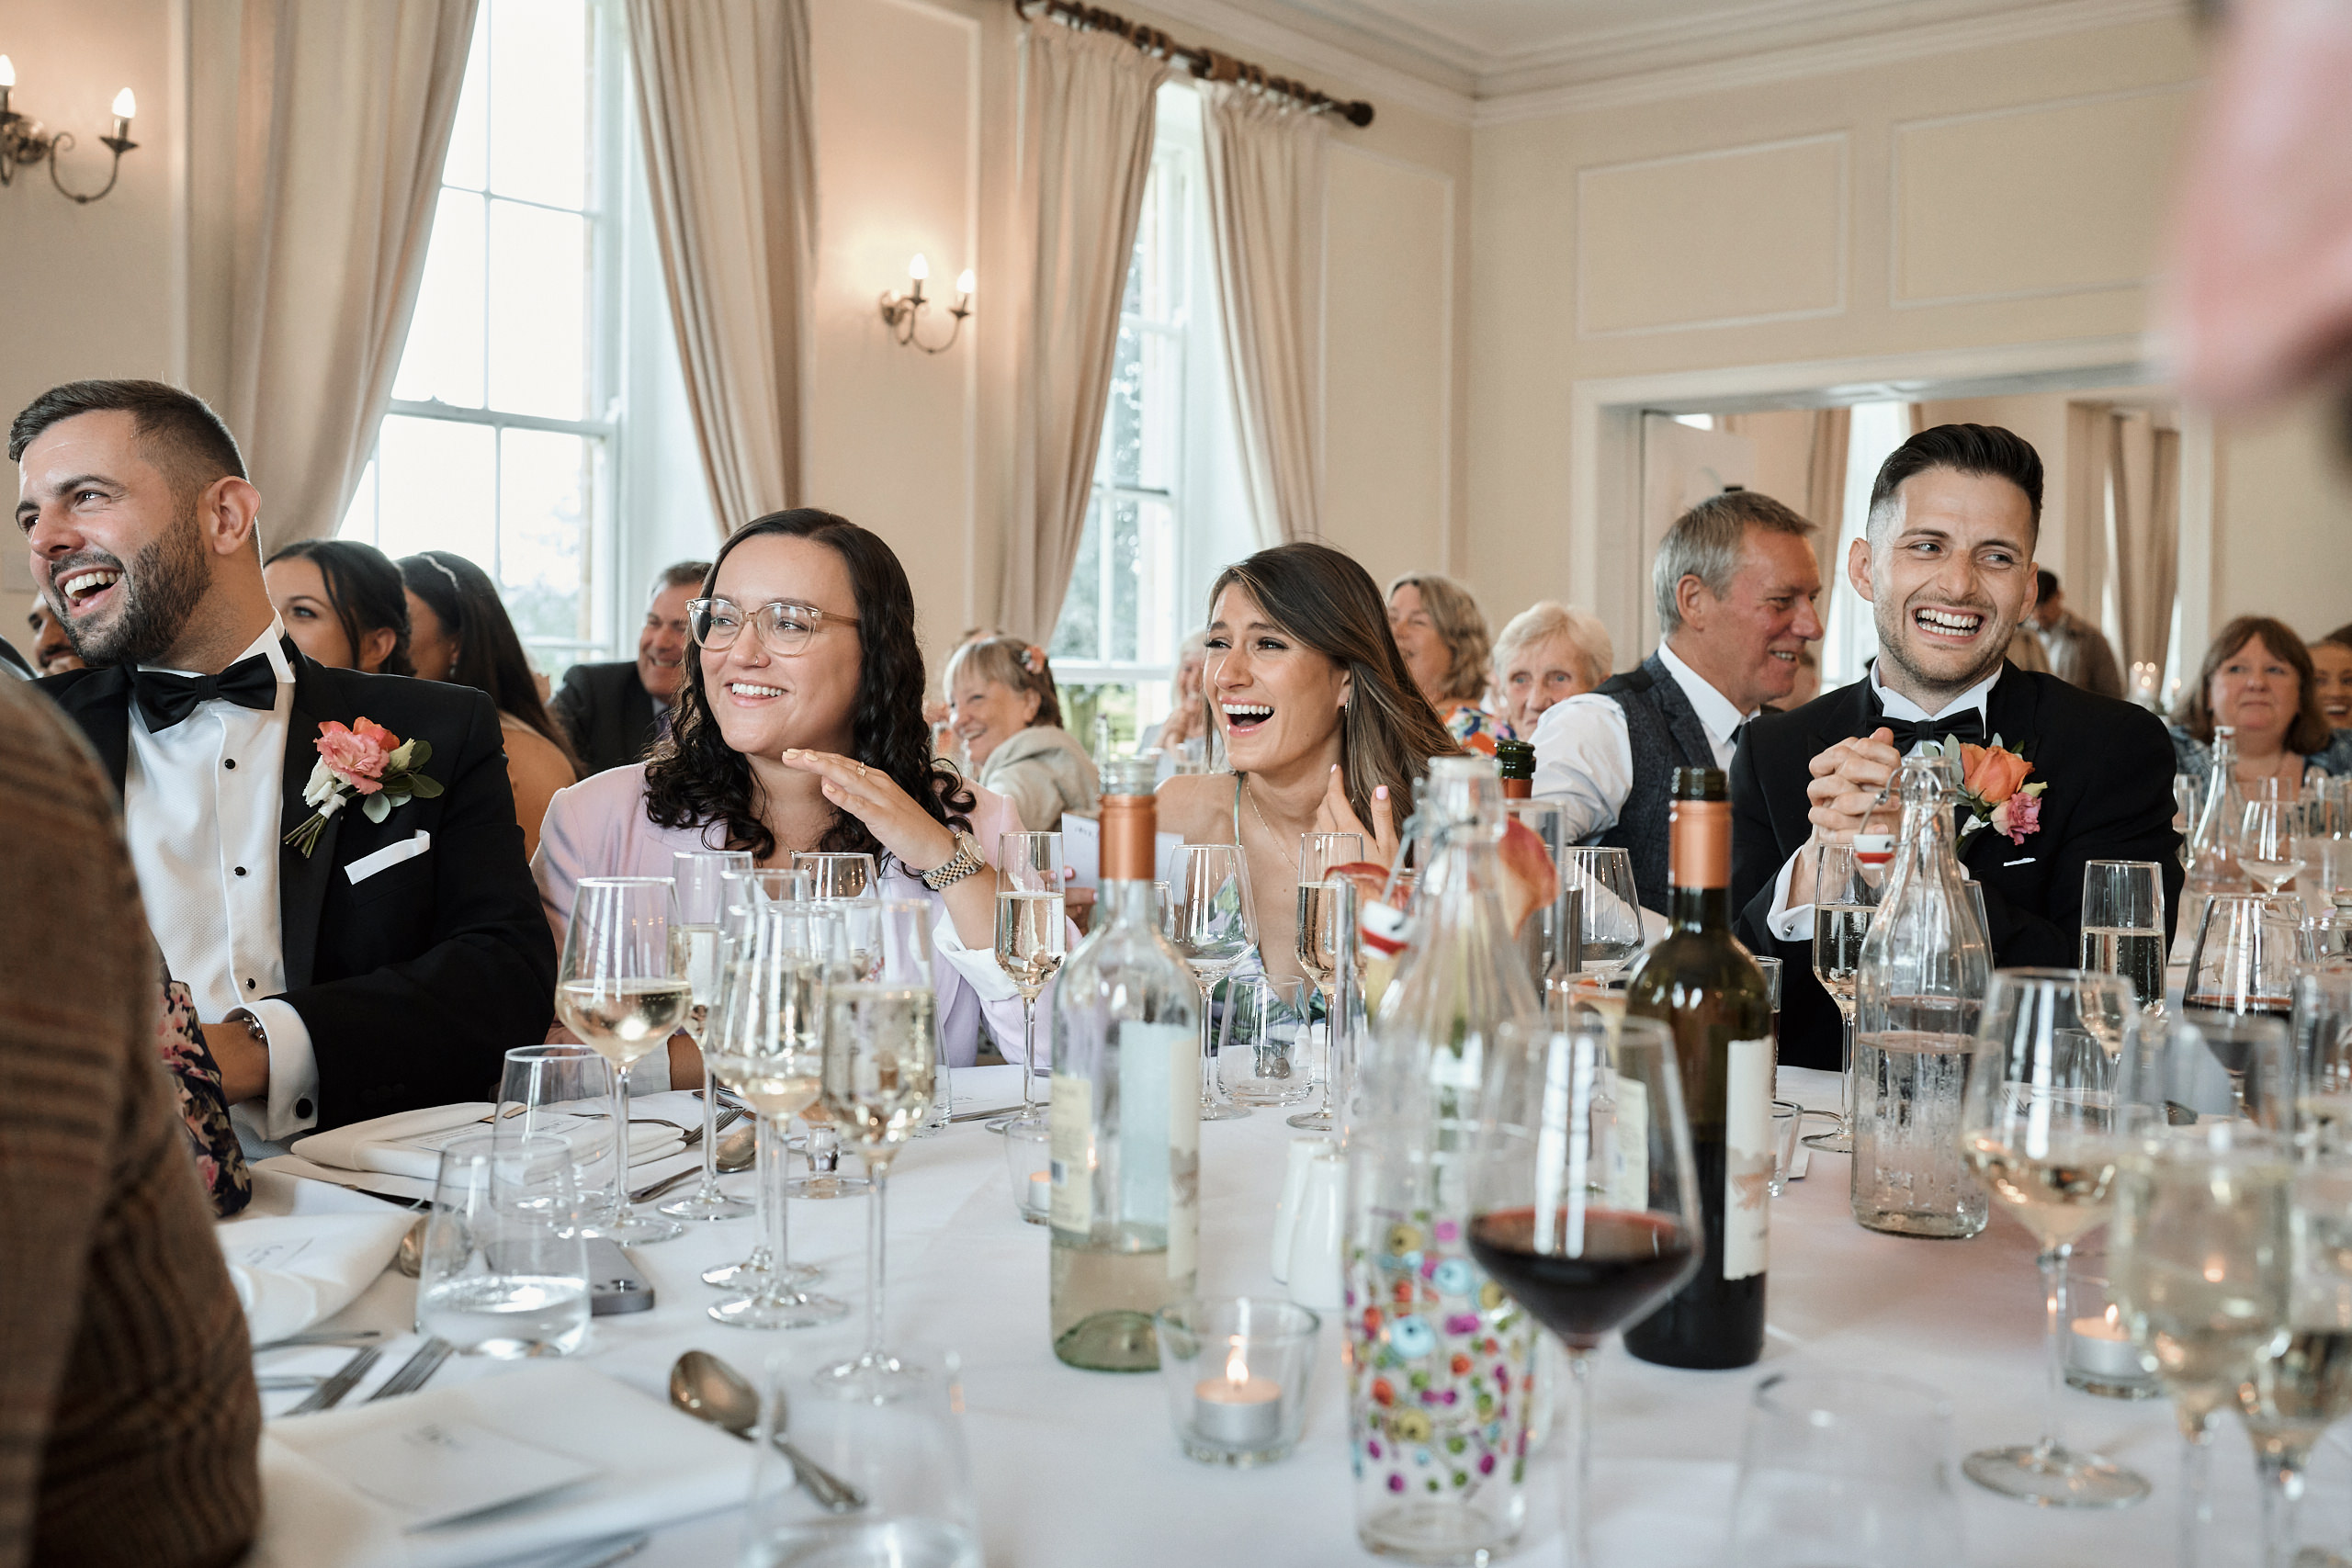 A group of people laughing at a wedding reception.